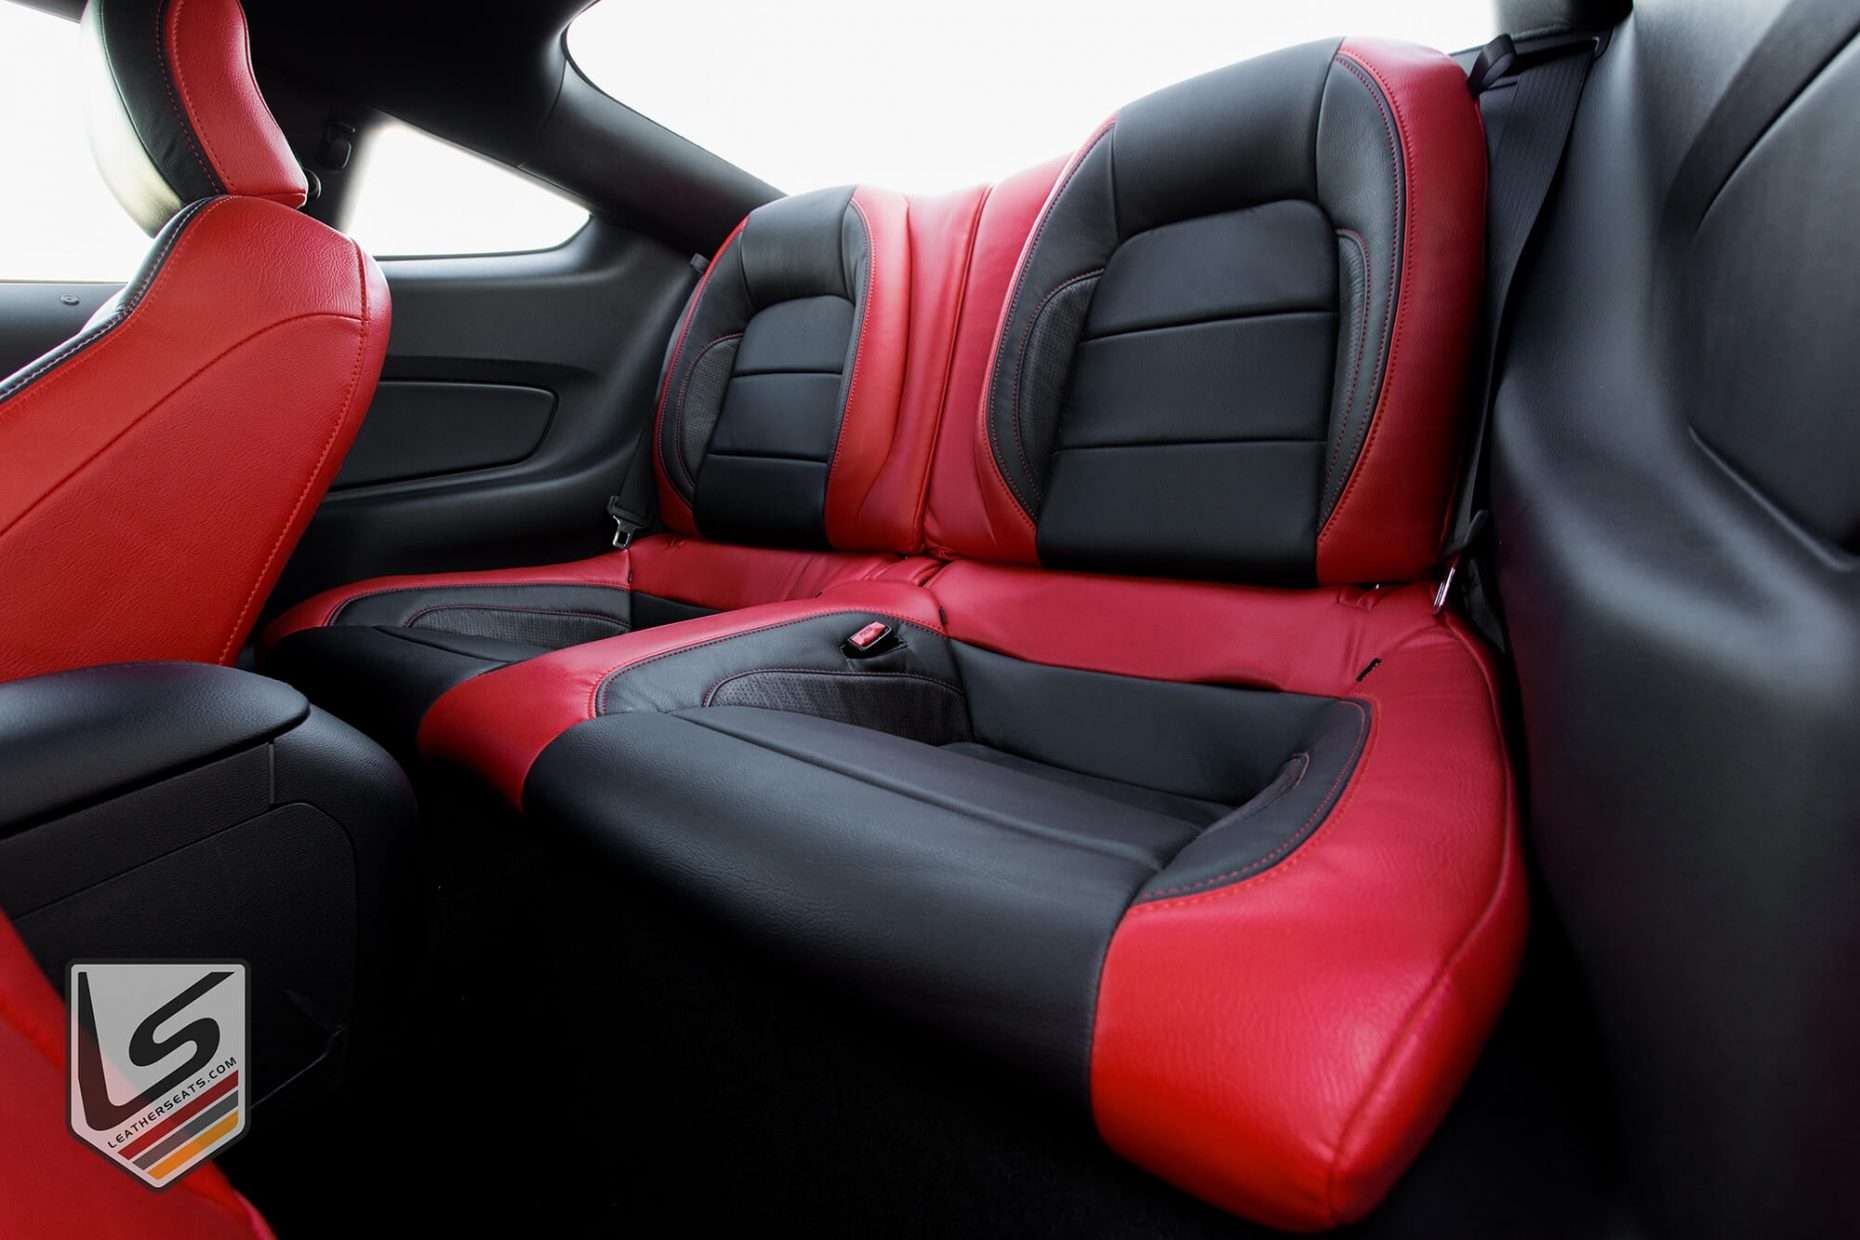 Ford Mustang GT with Bright Red & Black leather seats - Rear seats from drivers side